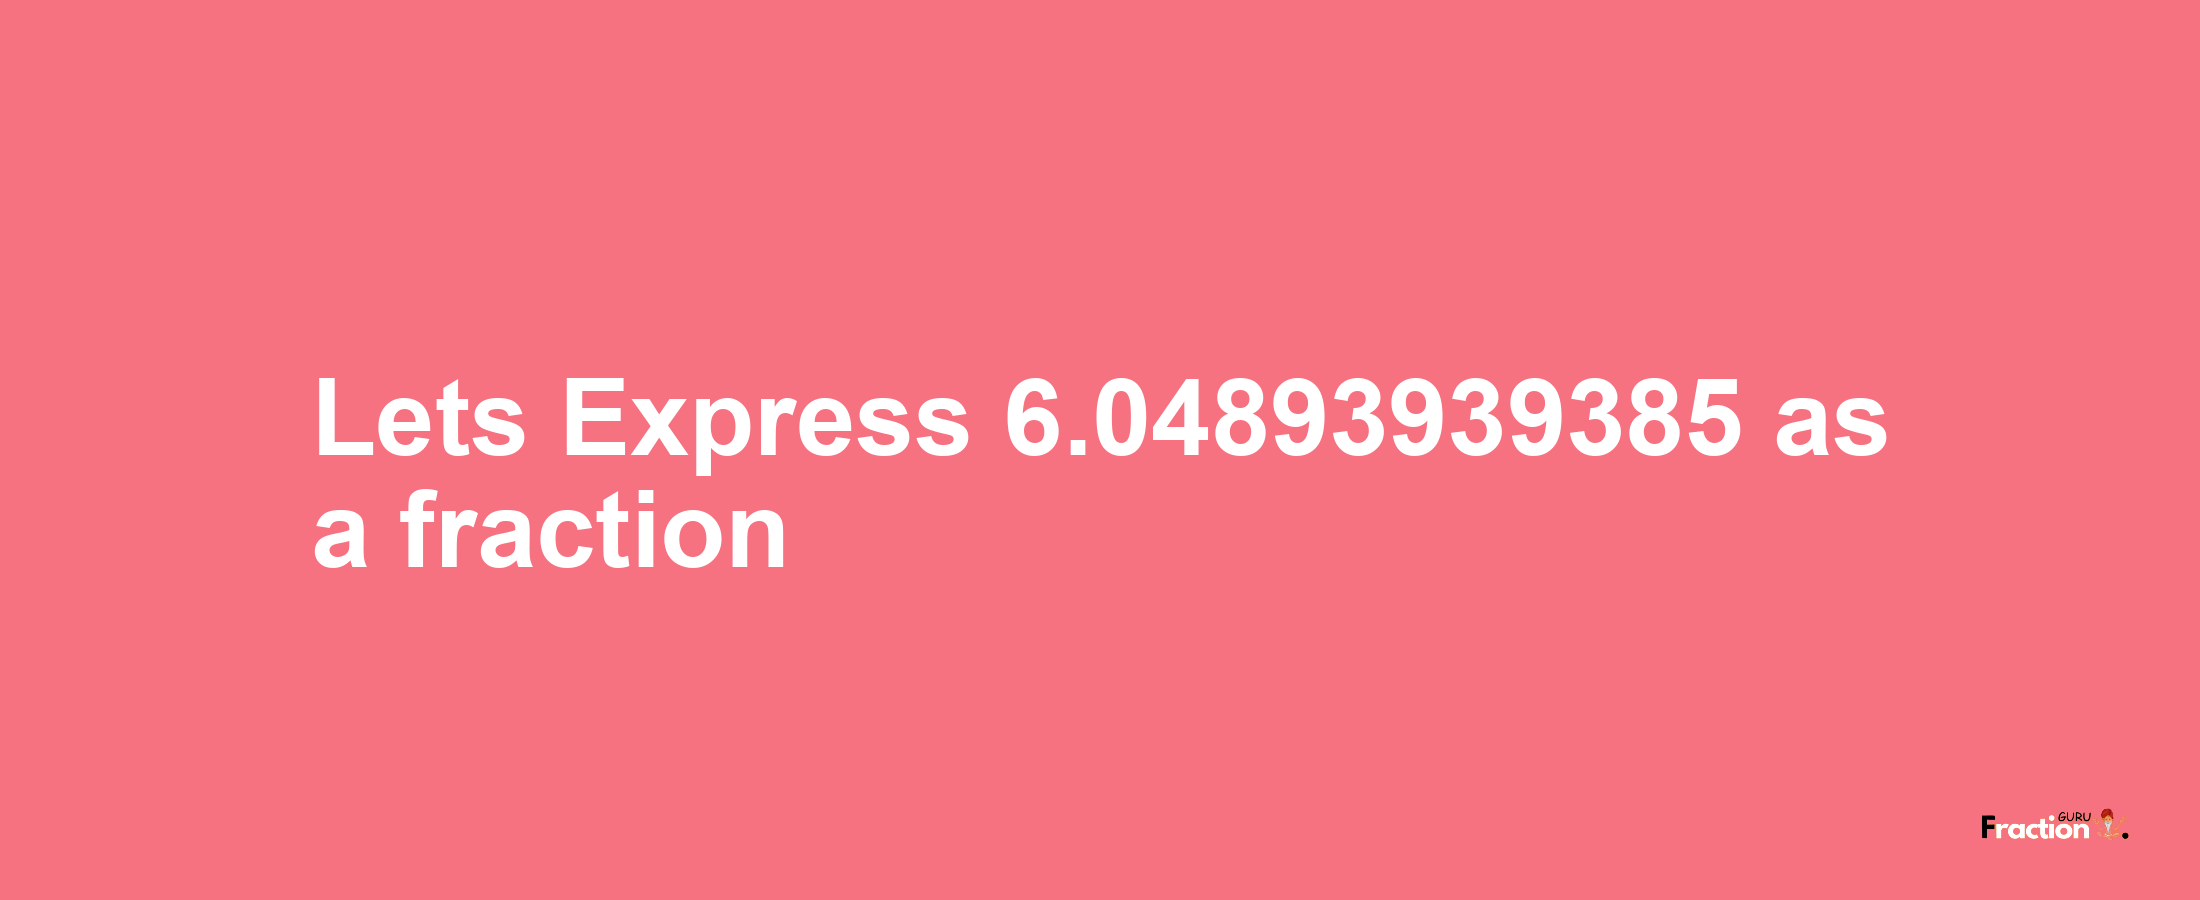 Lets Express 6.04893939385 as afraction